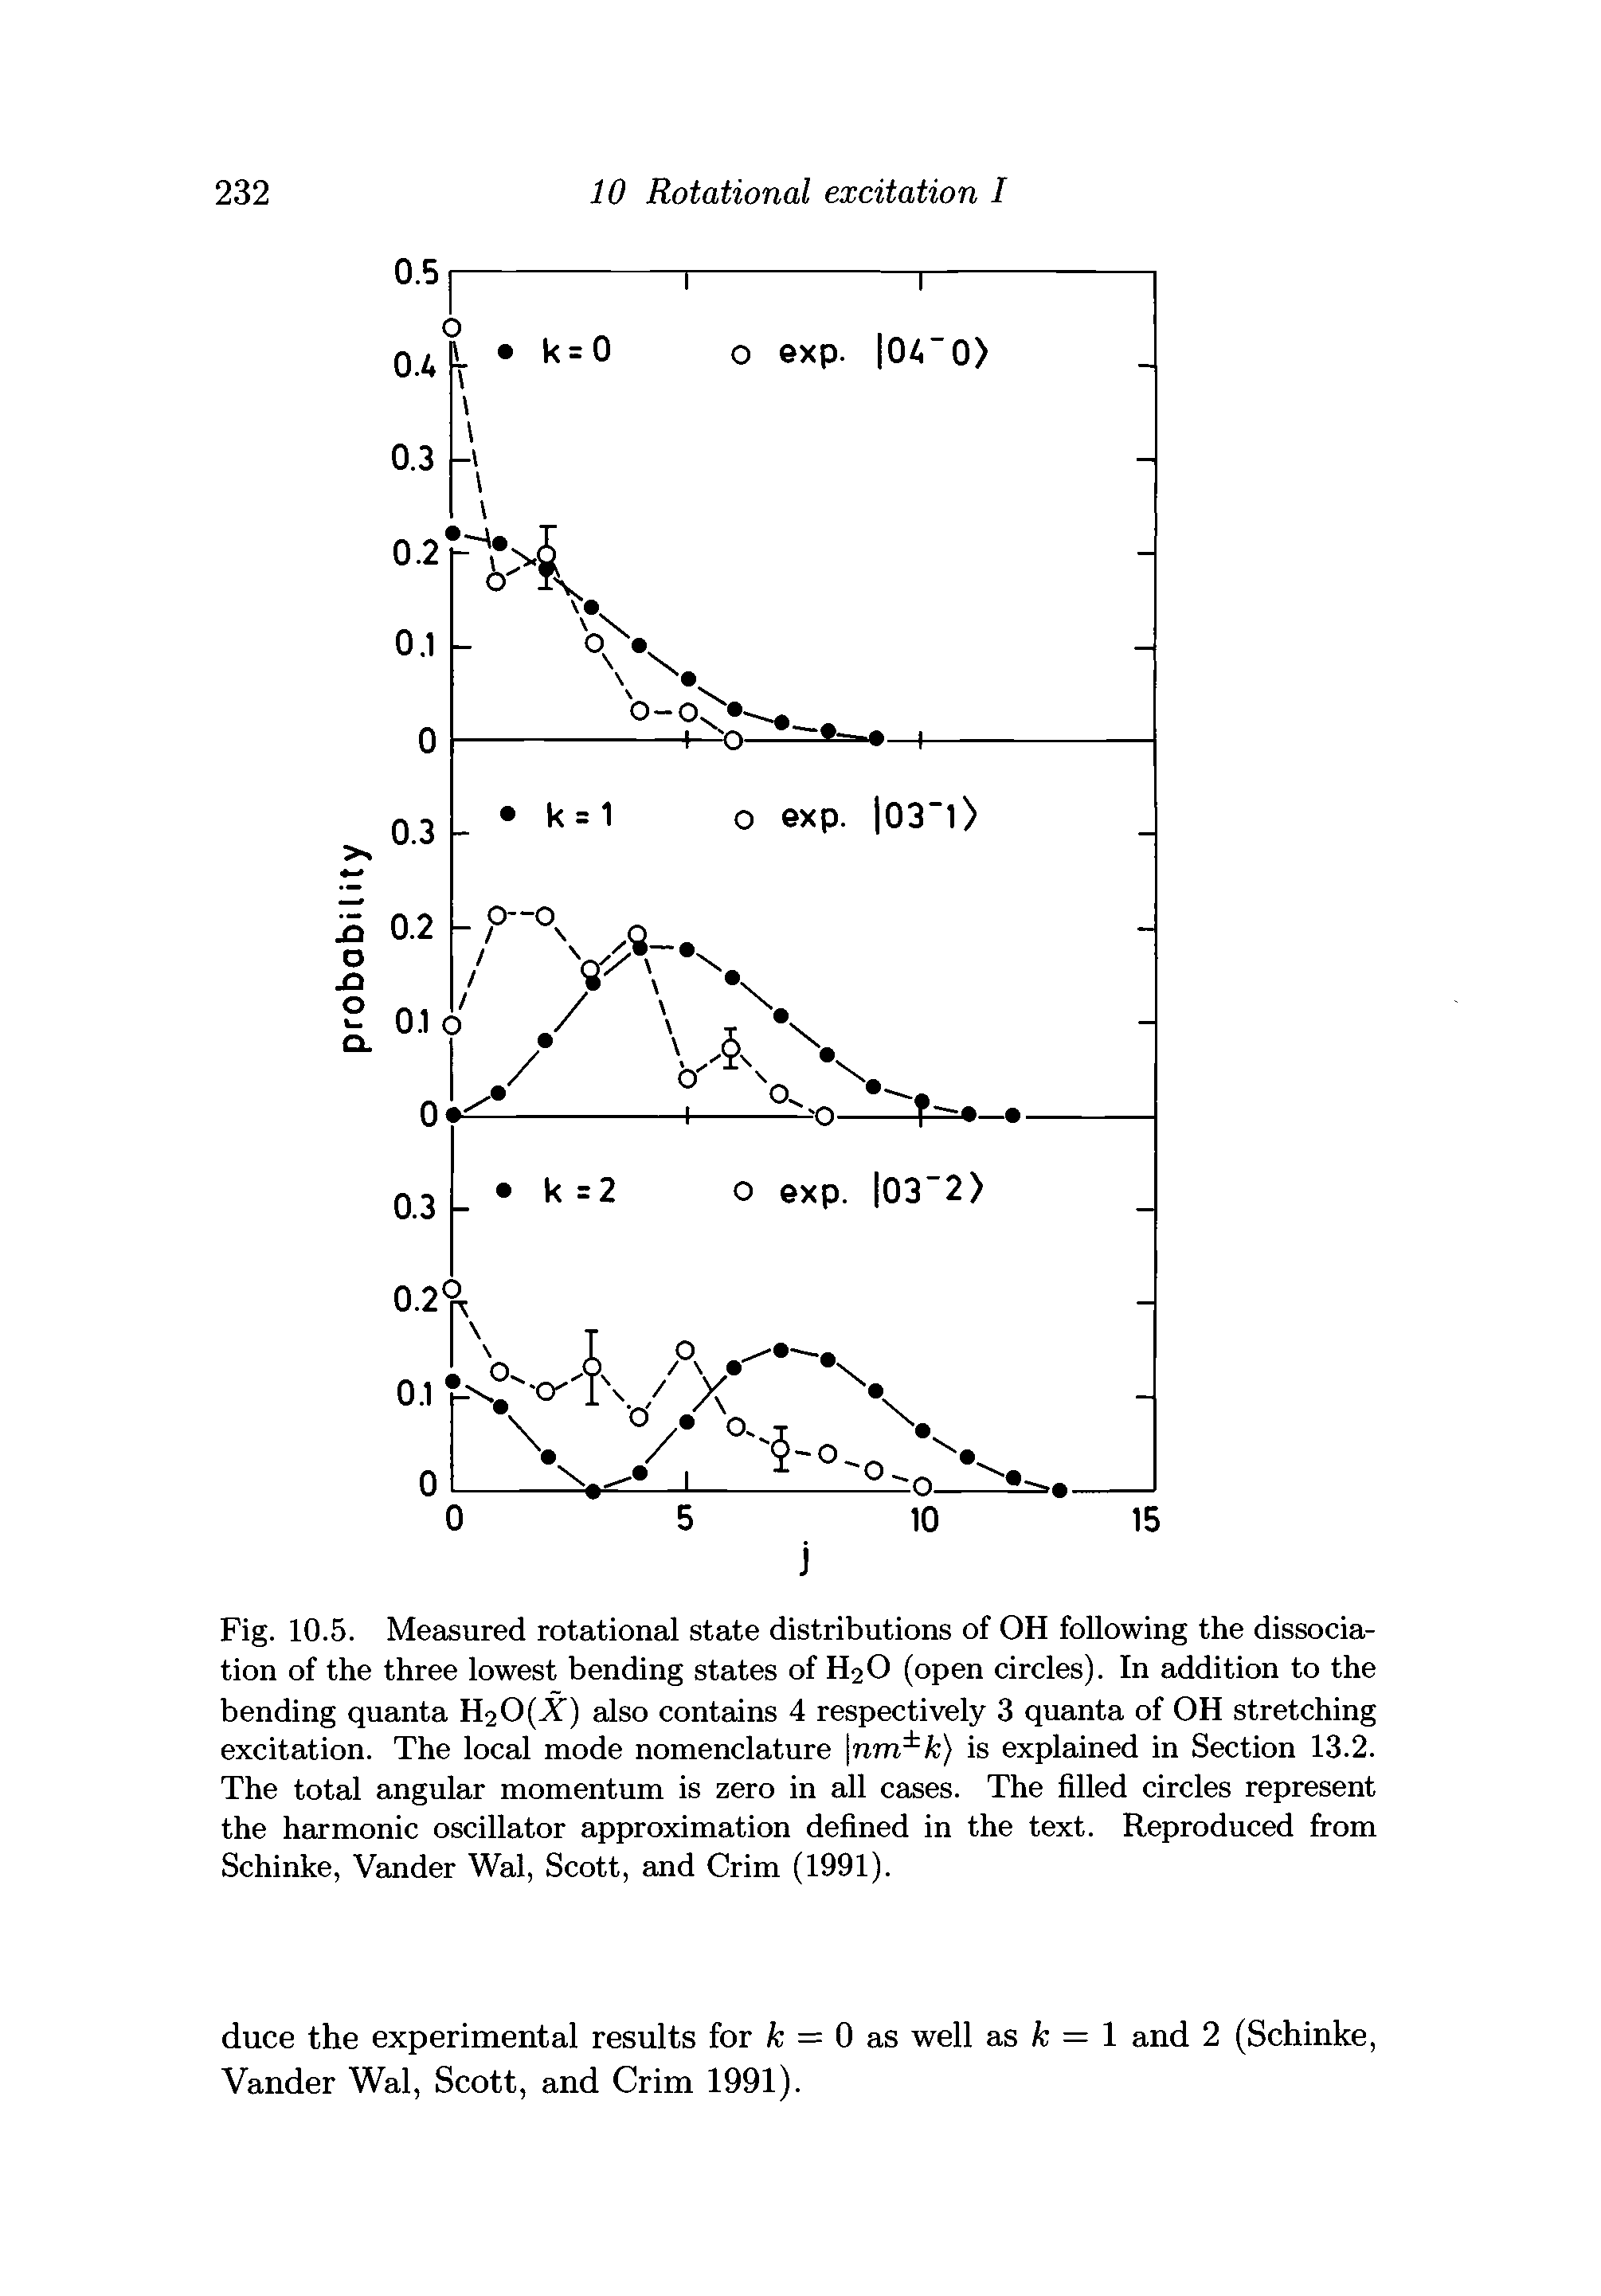 Fig. 10.5. Measured rotational state distributions of OH following the dissociation of the three lowest bending states of H2O (open circles). In addition to the bending quanta H20(X) also contains 4 respectively 3 quanta of OH stretching excitation. The local mode nomenclature nm k) is explained in Section 13.2. The total angular momentum is zero in all cases. The filled circles represent the harmonic oscillator approximation defined in the text. Reproduced from Schinke, Vander Wal, Scott, and Crim (1991).